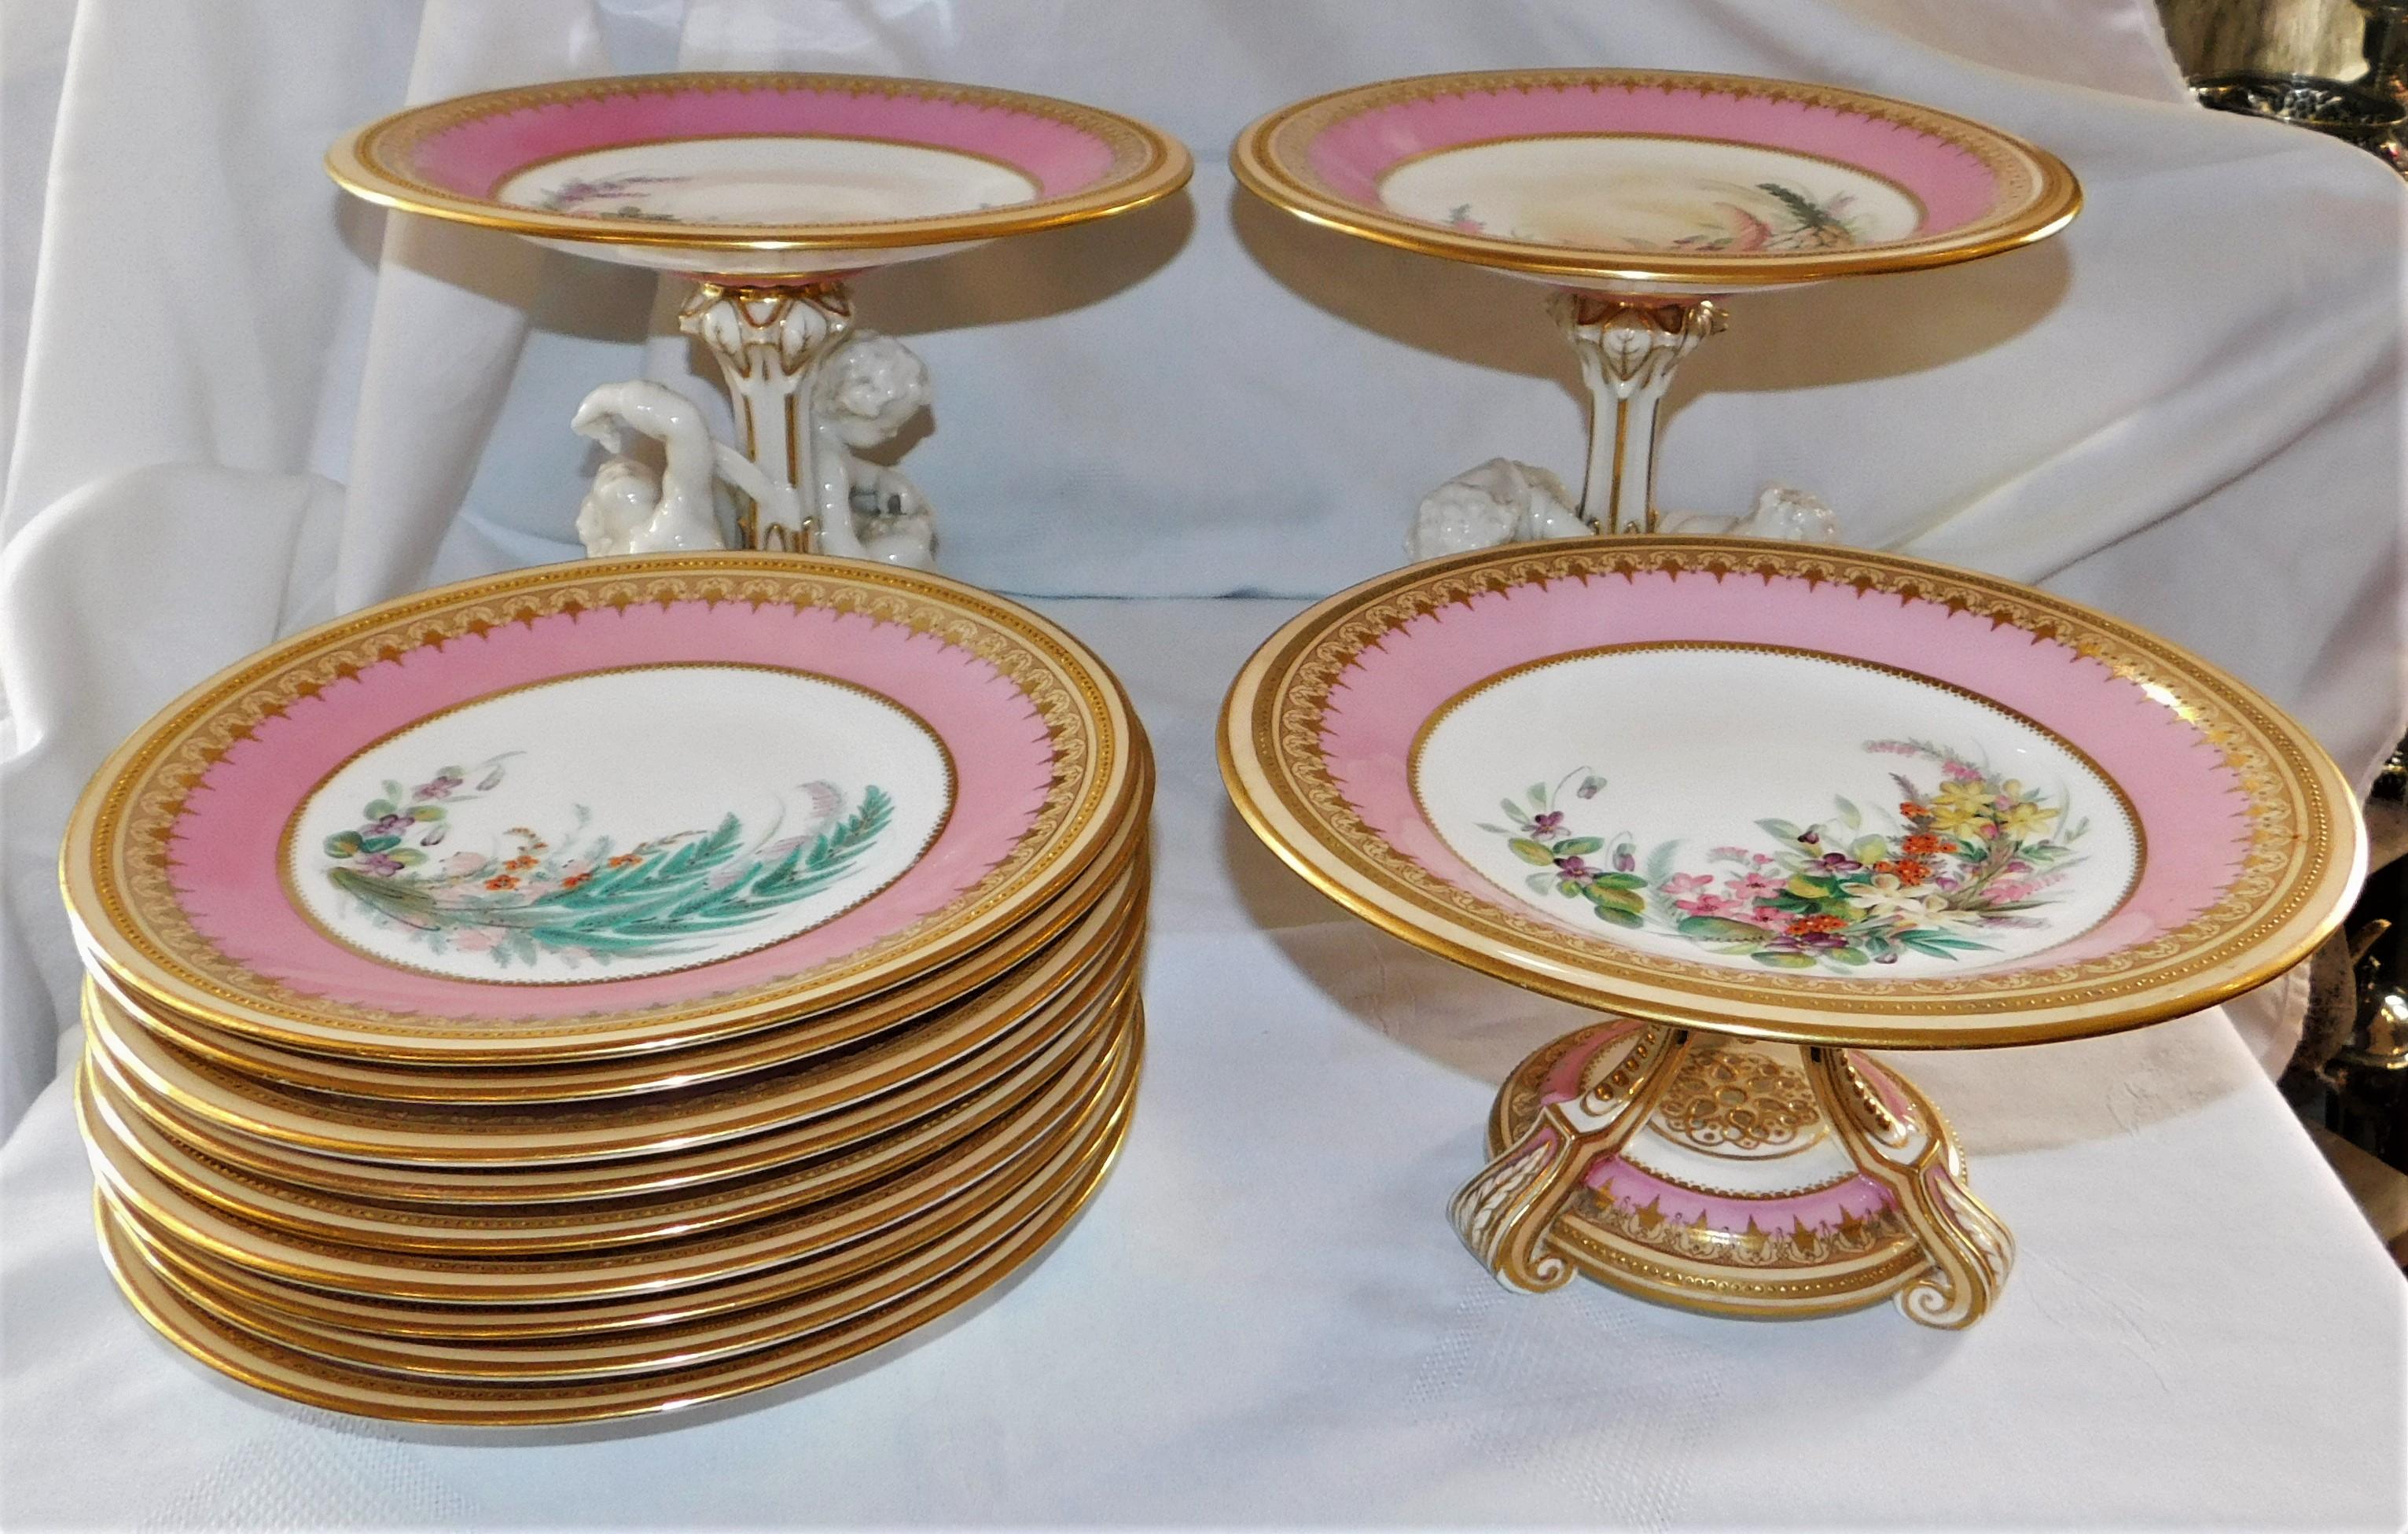 This unusual dessert service consists of nine plates and three footed compotes. Each piece is uniquely hand painted with a floral design and embellished in gold trim. The footed compotes are a brilliant addition to the grouping for serving and